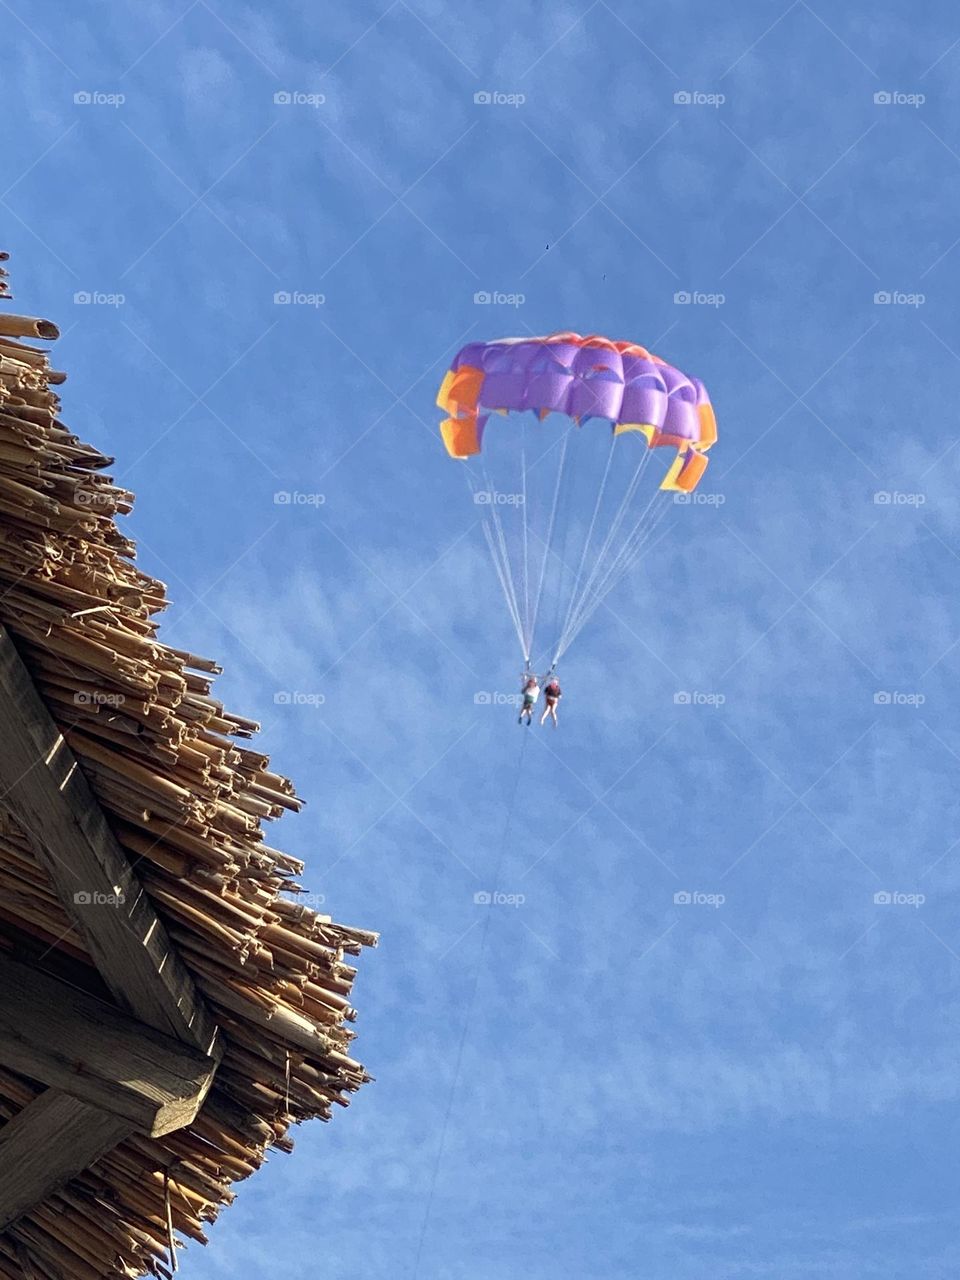 Colourful parachute in the blue sky with white clouds 